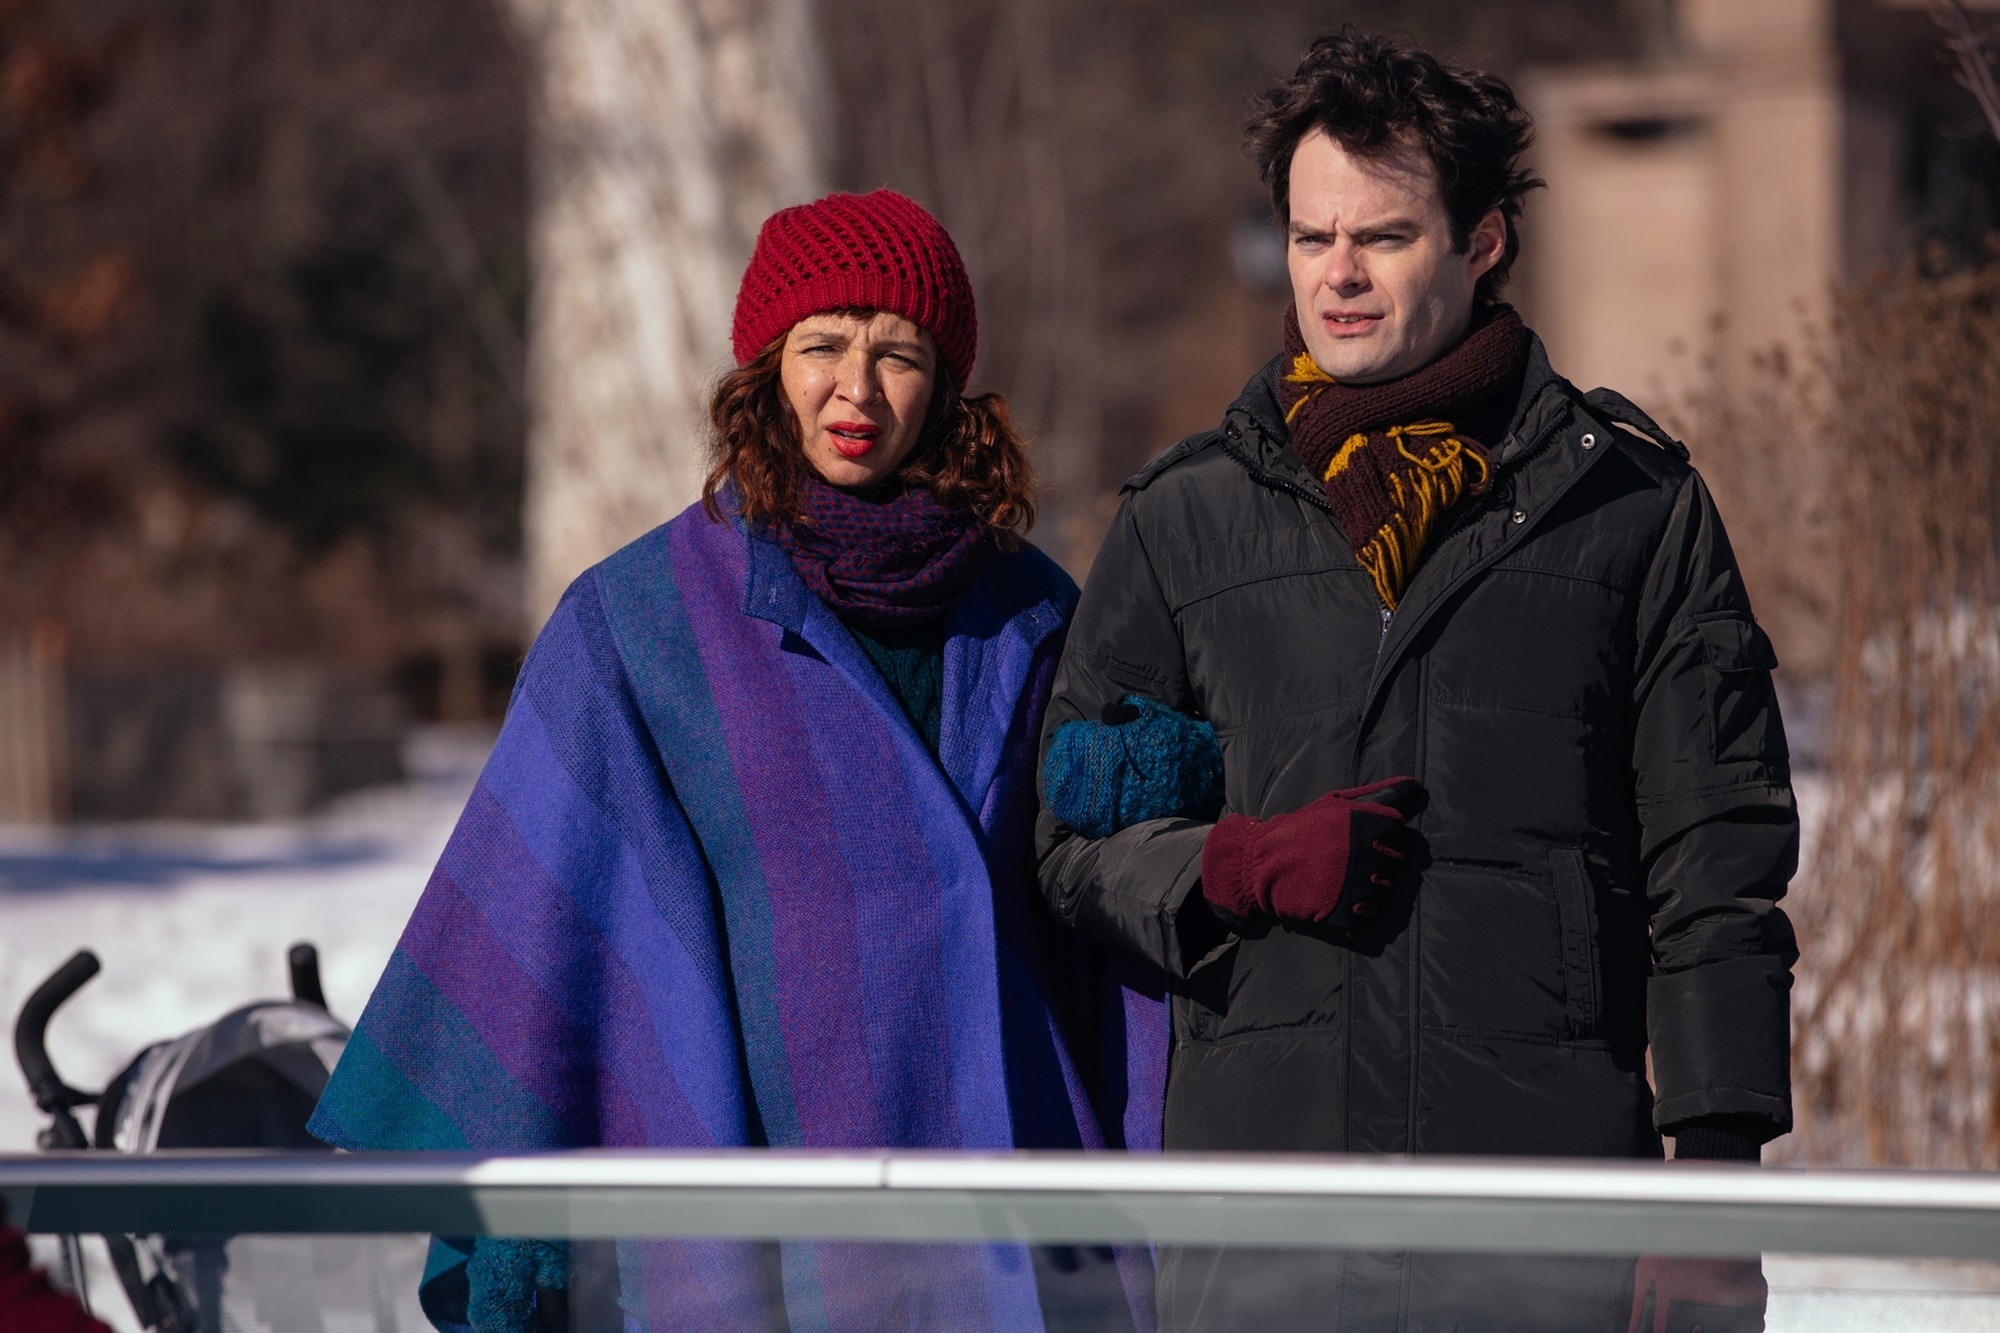 Maya Rudolph stars as Felicia and Bill Hader stars as Tony in Sony Pictures Classics' Maggie's Plan (2016)